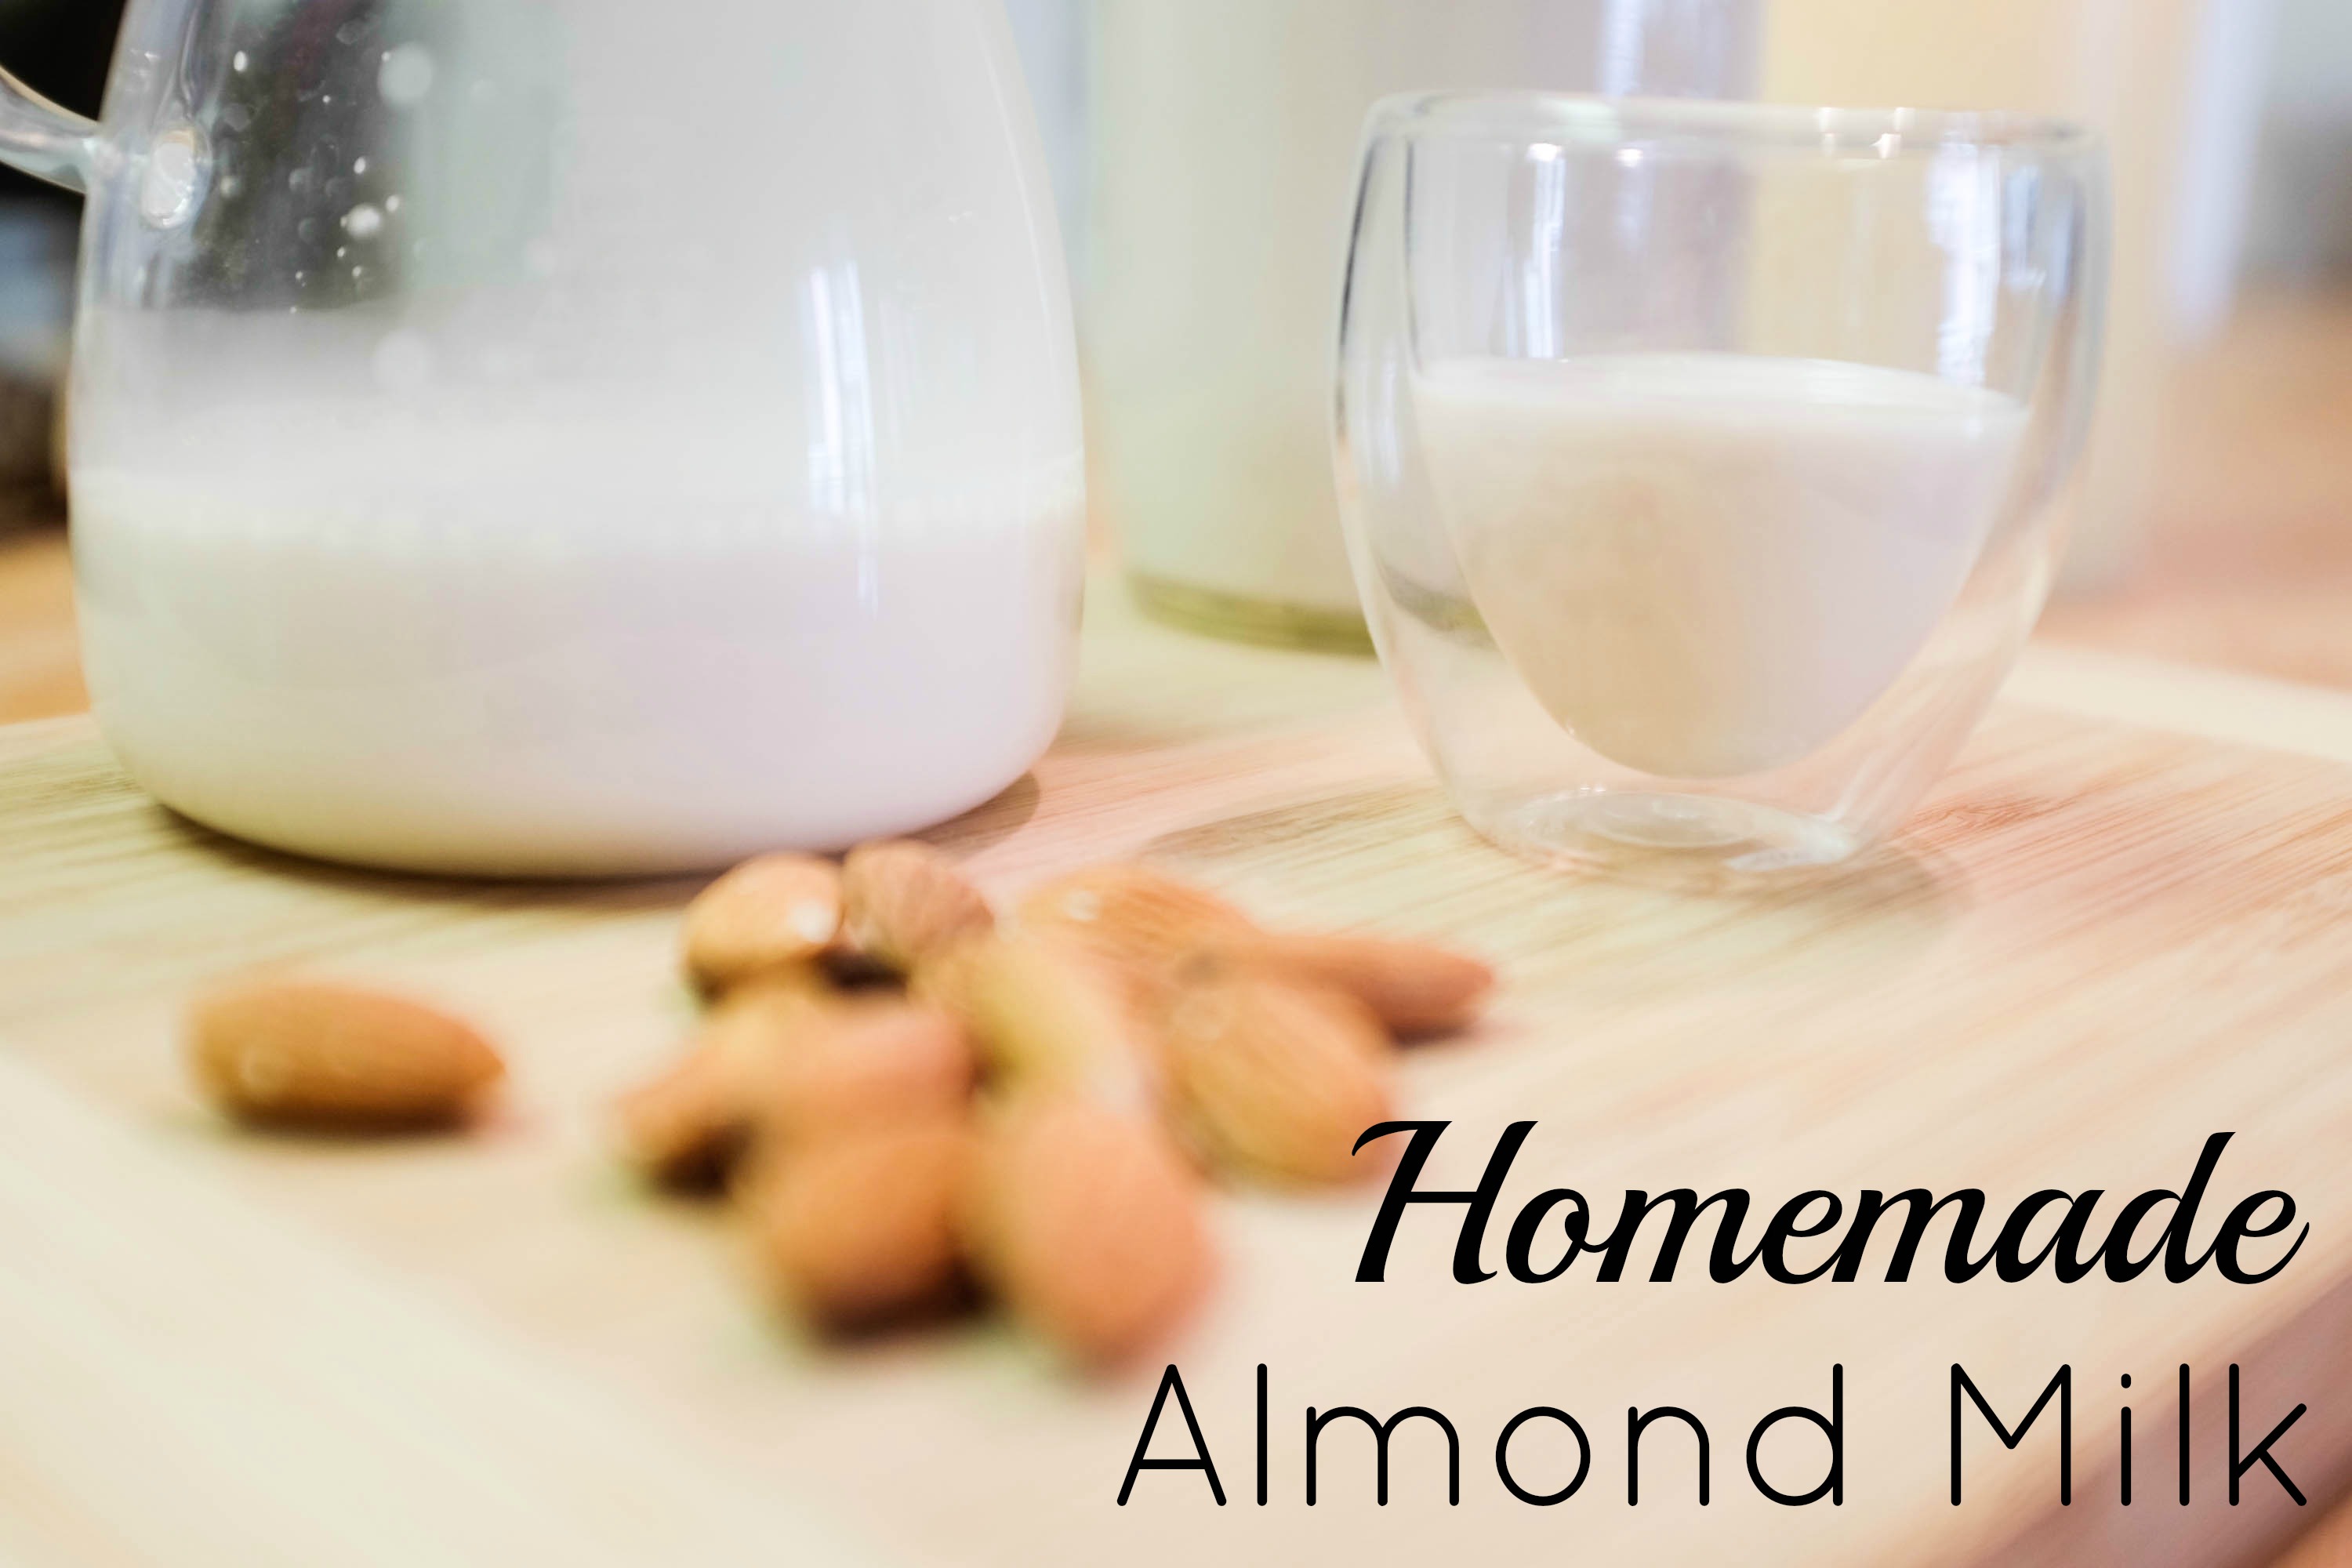 How To Make Almond Milk (and a little chat about almonds)